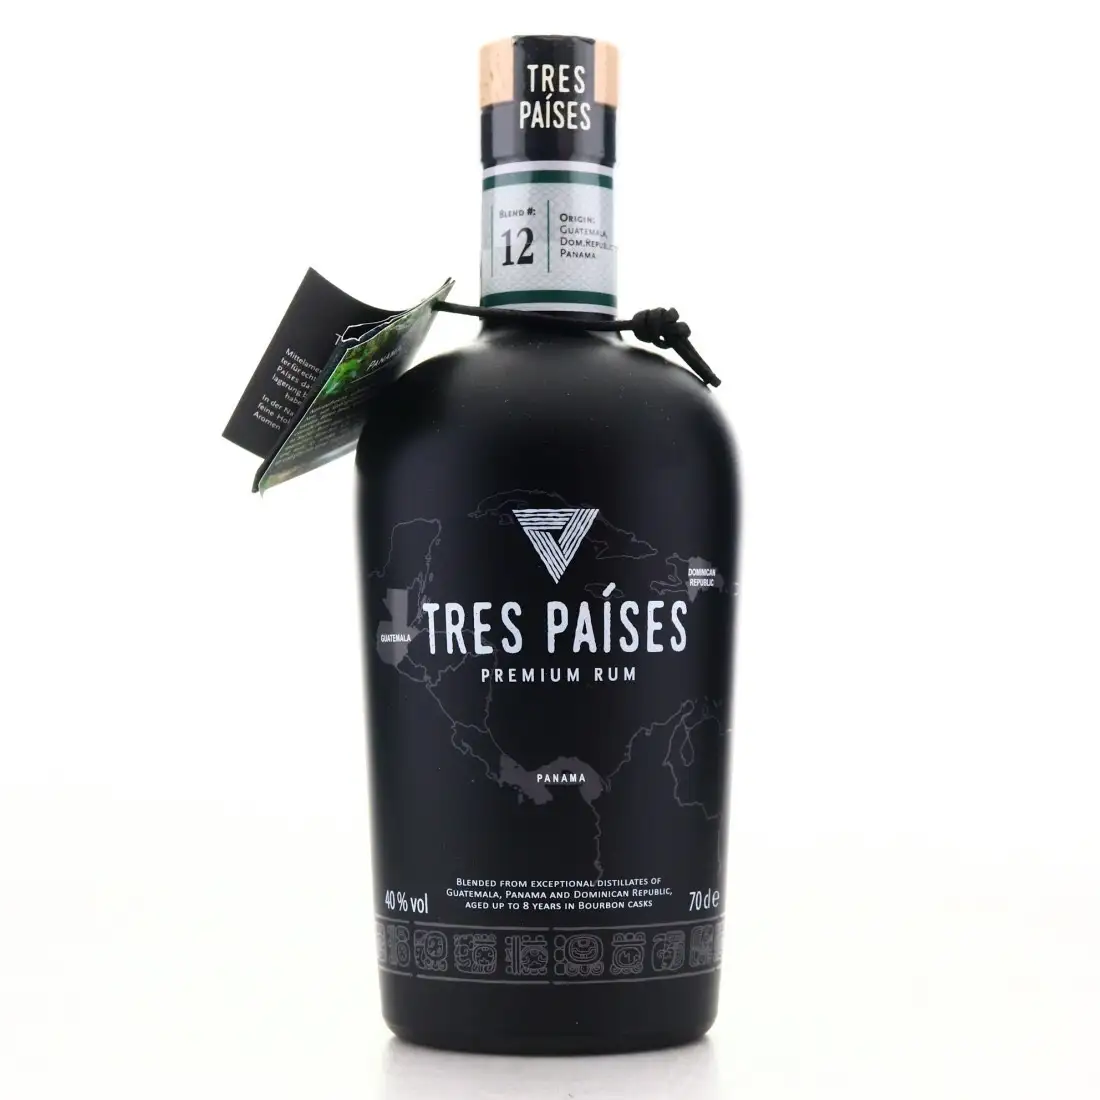 Image of the front of the bottle of the rum Tres Paìses Premium Rum